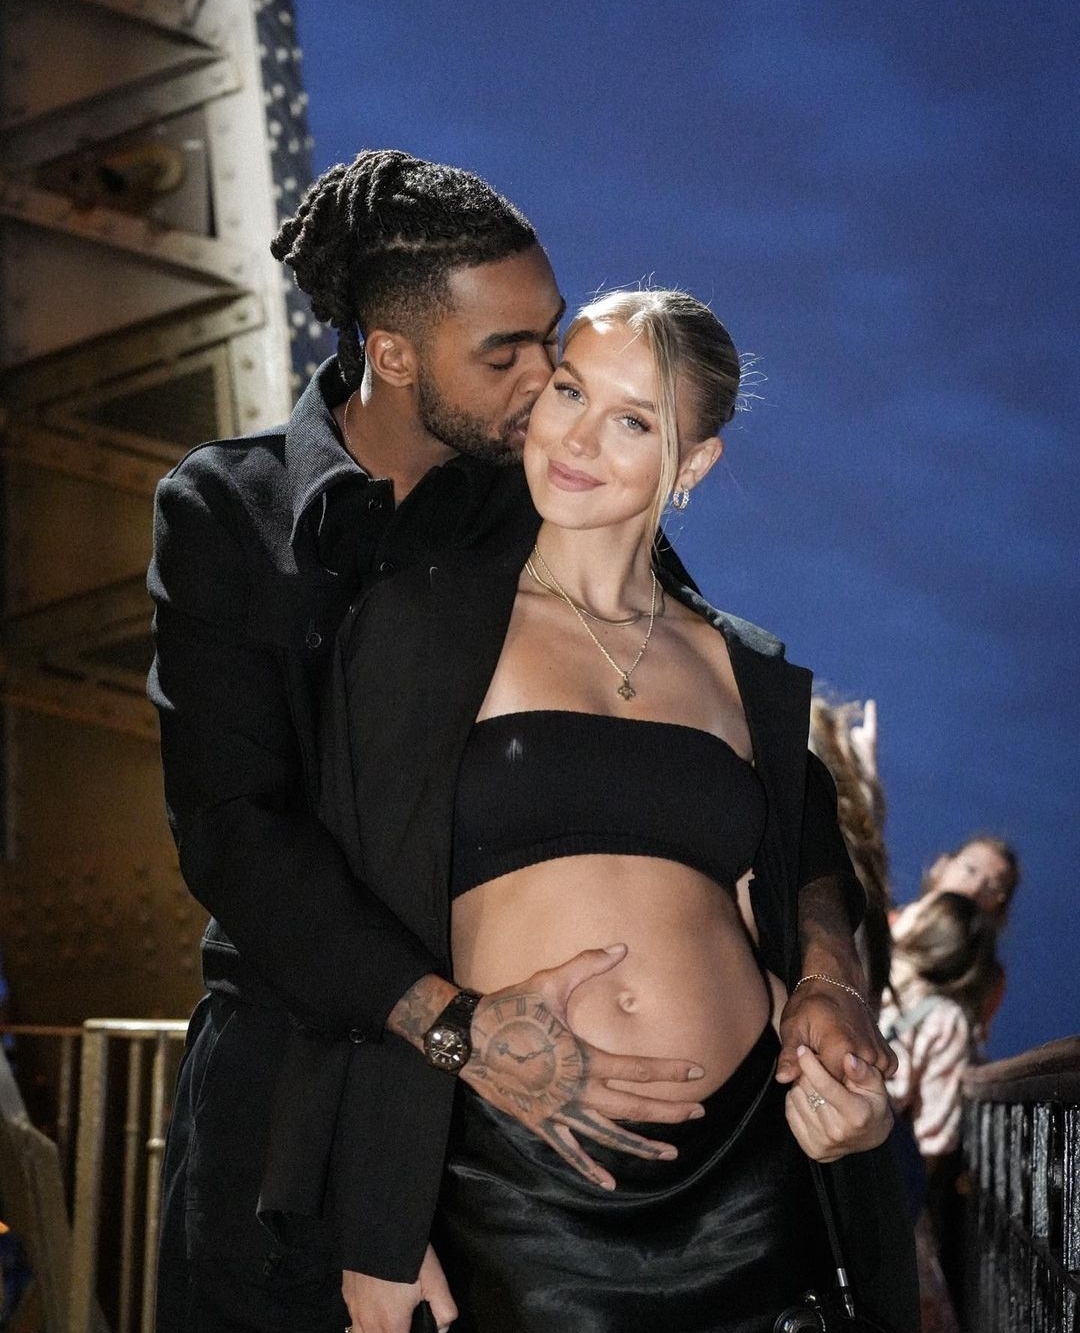 Laura is pregnant with Russell's child